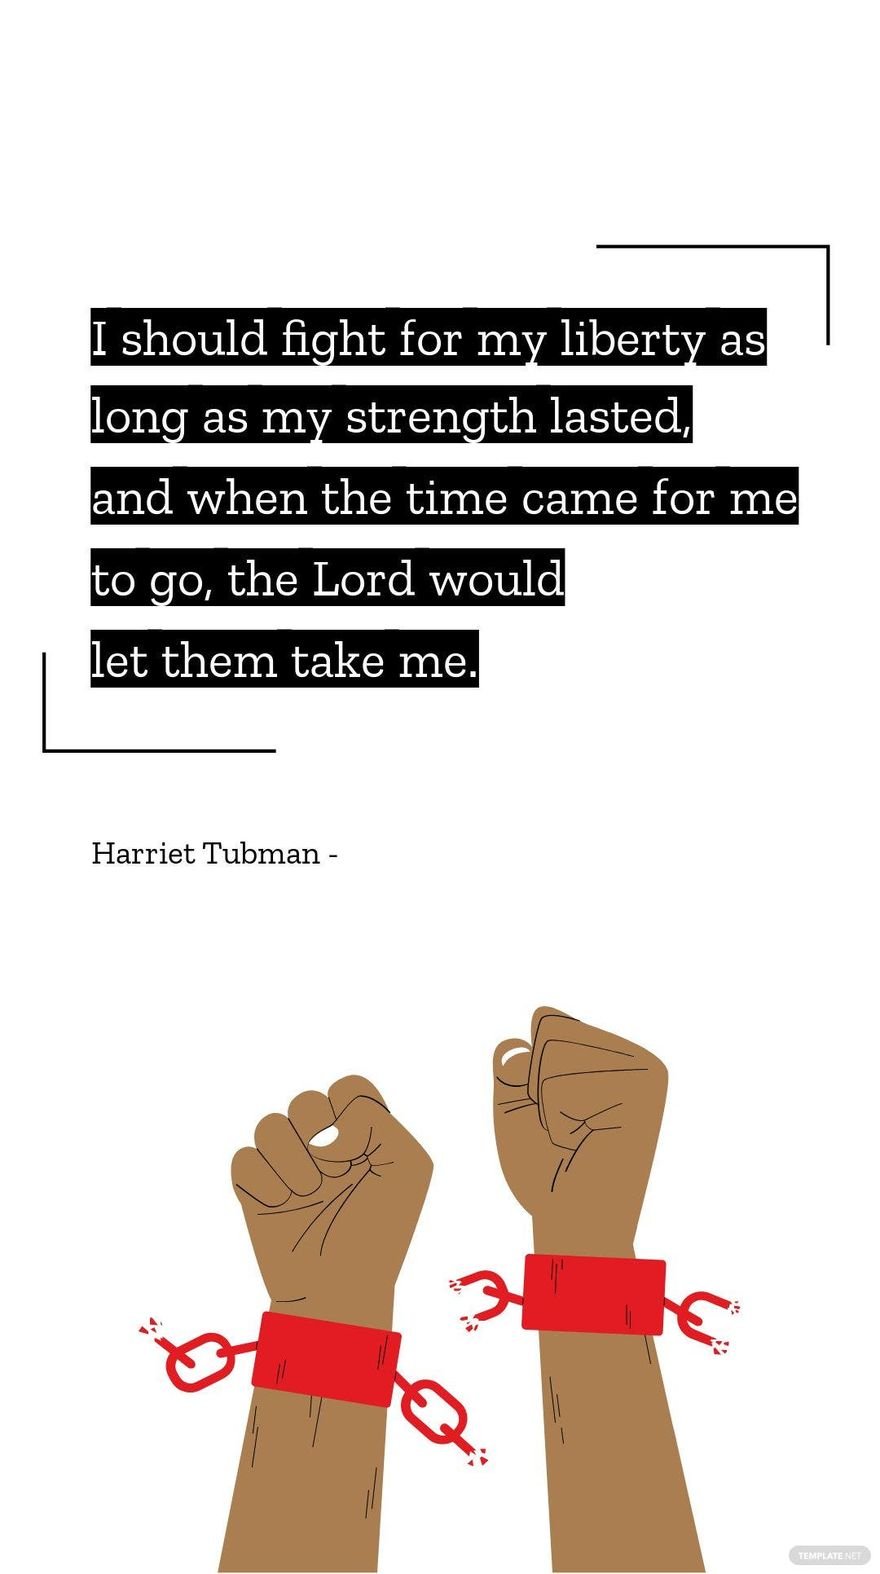 Harriet Tubman - I should fight for my liberty as long as my strength lasted, and when the time came for me to go, the Lord would let them take me.